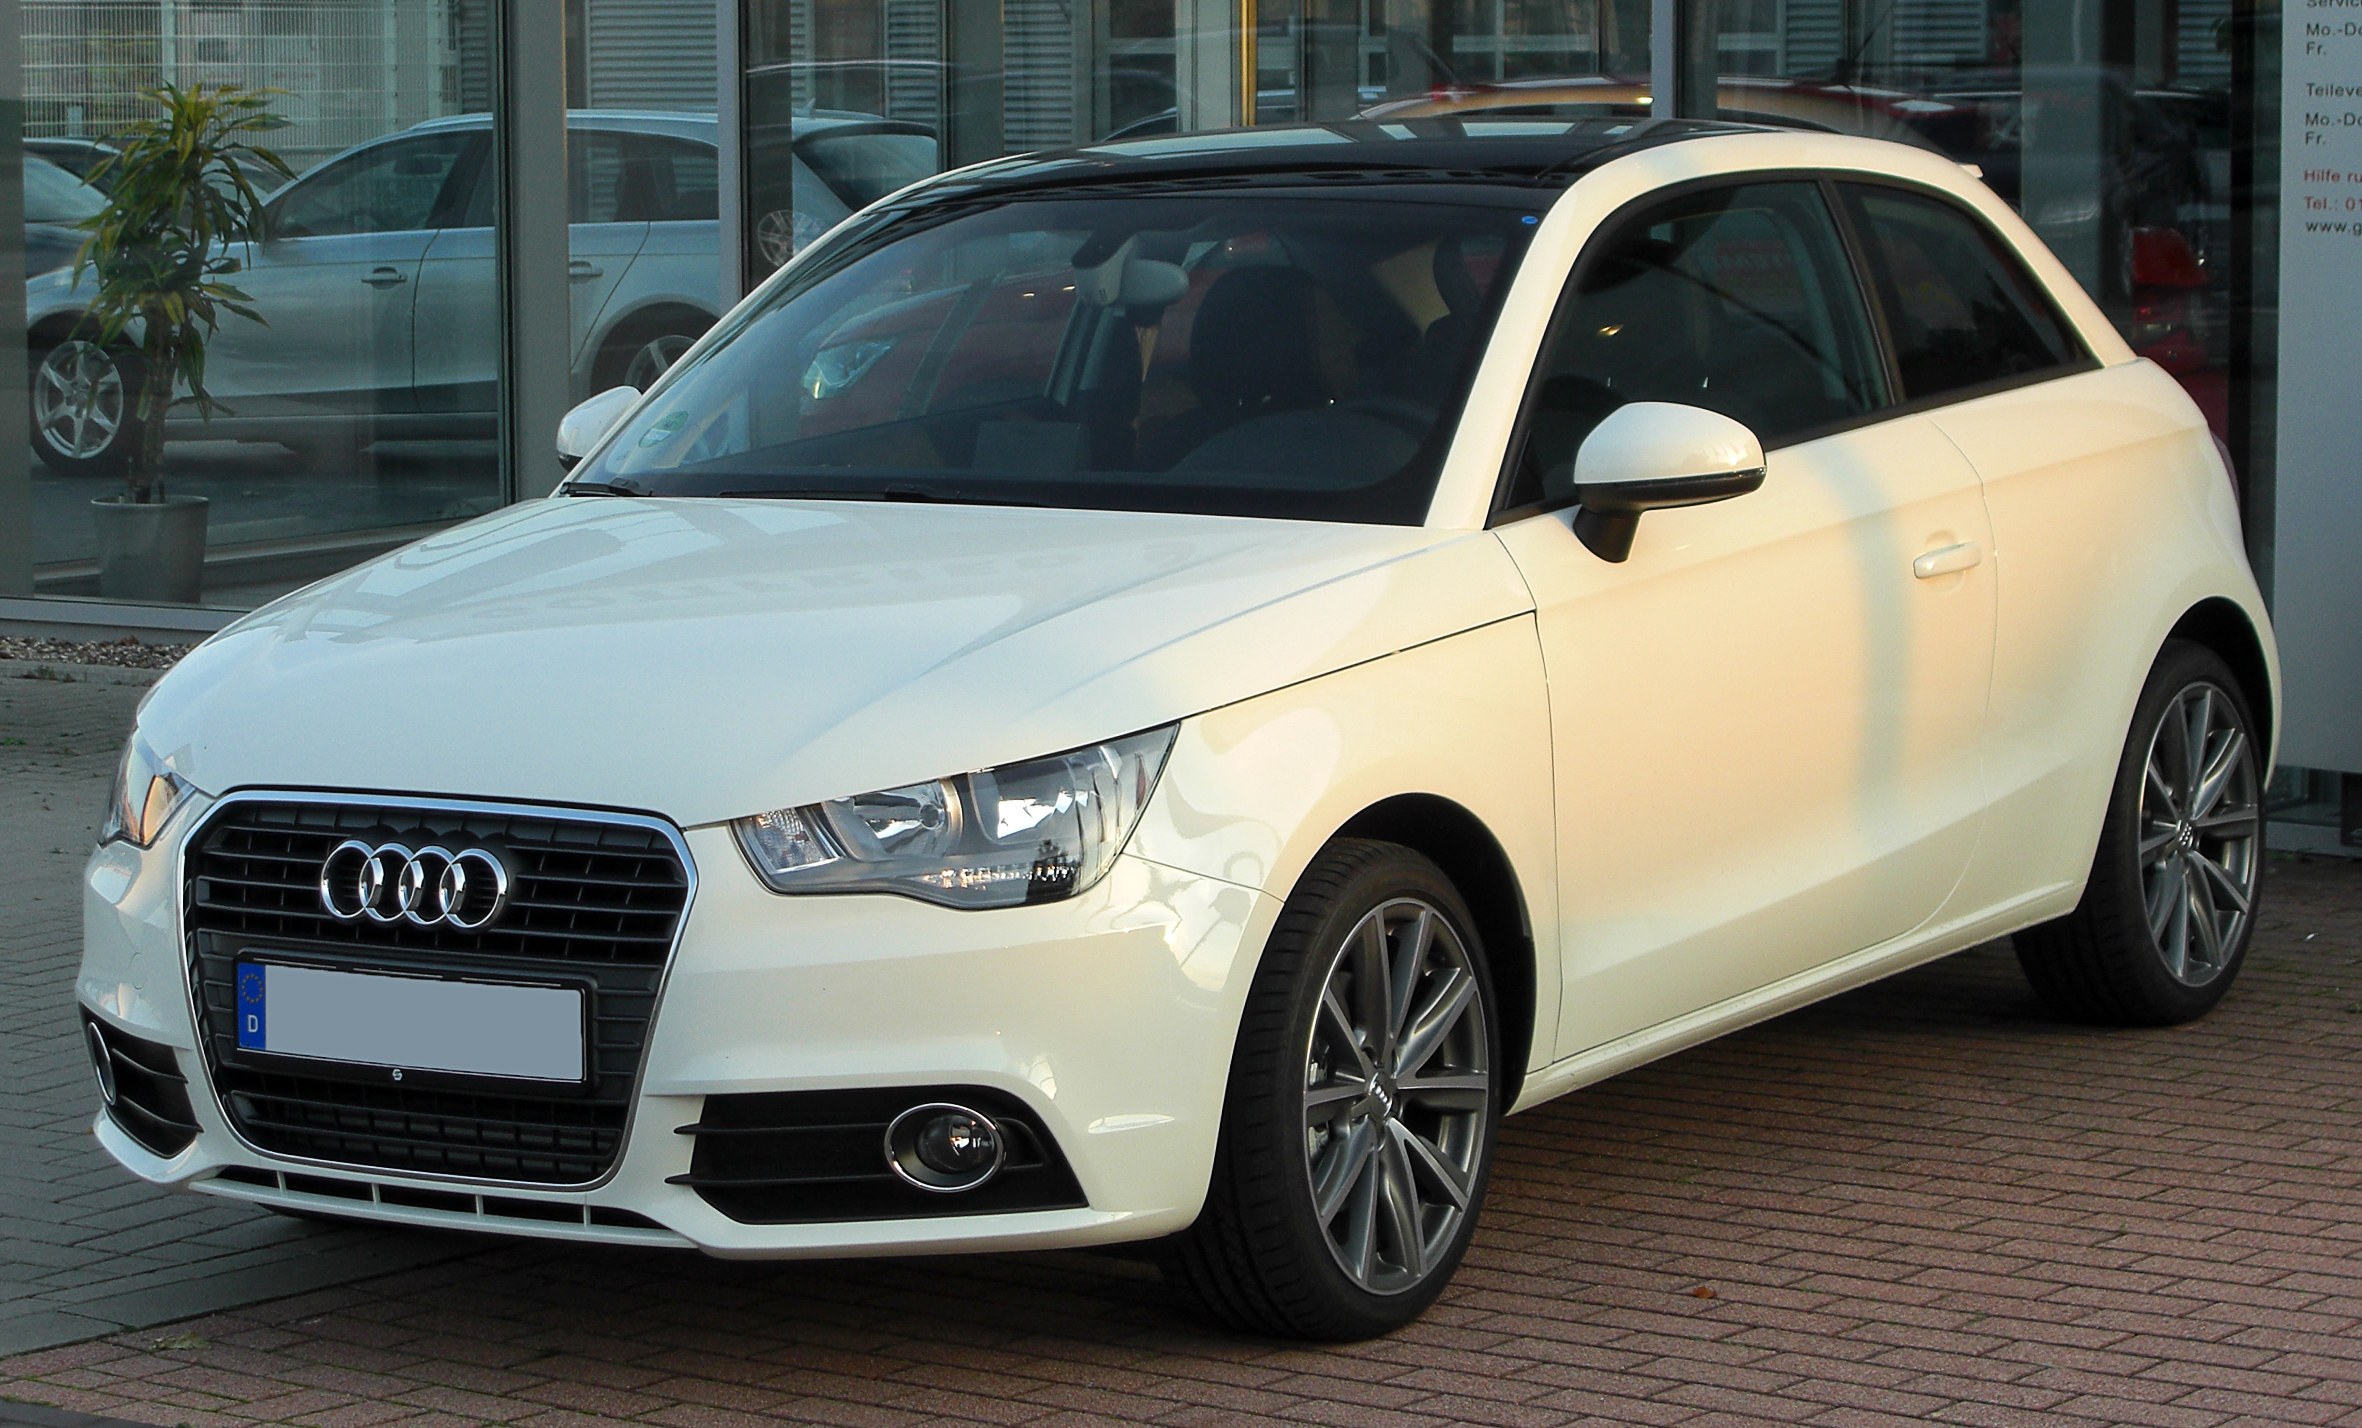 Audi A1 1.6 TDI technical details, history, photos on